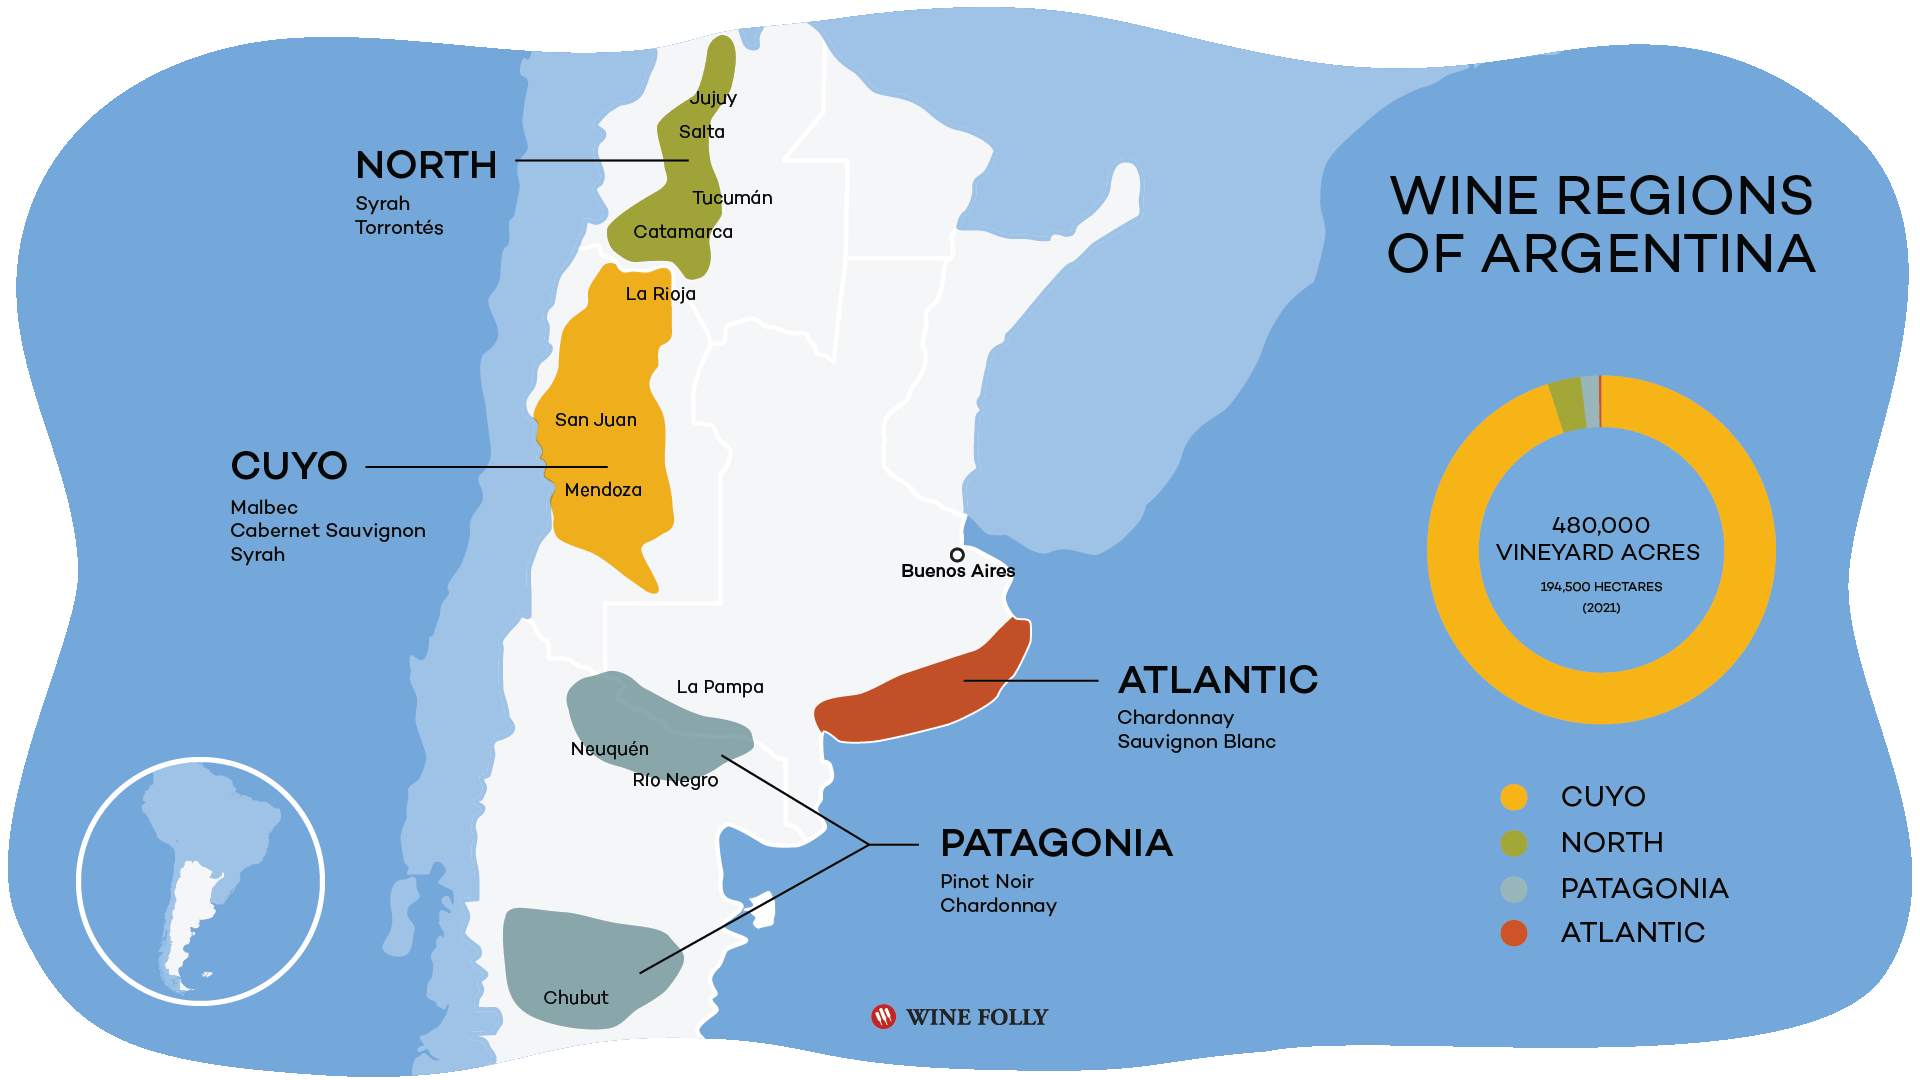 Argentina Wine Region Guides: Discover the Best Wine Regions